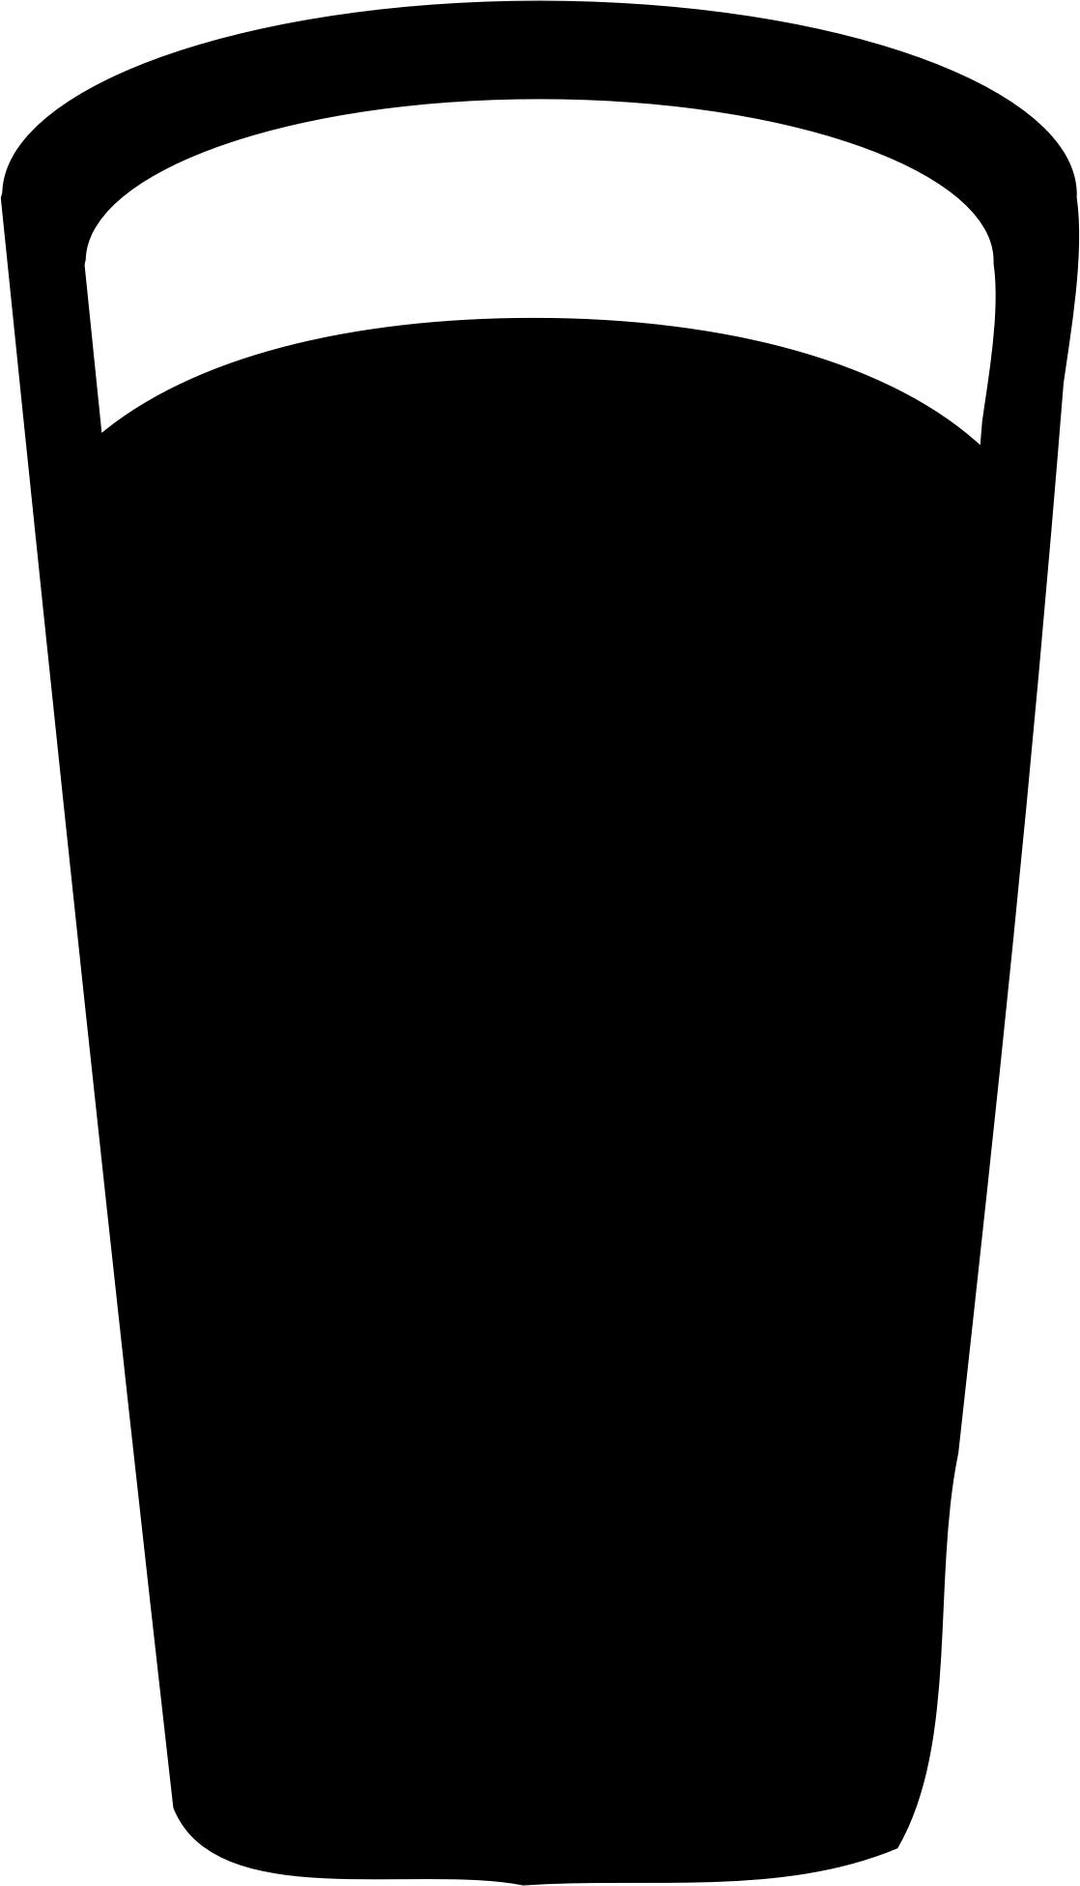 A Pint of Stout Beer png transparent